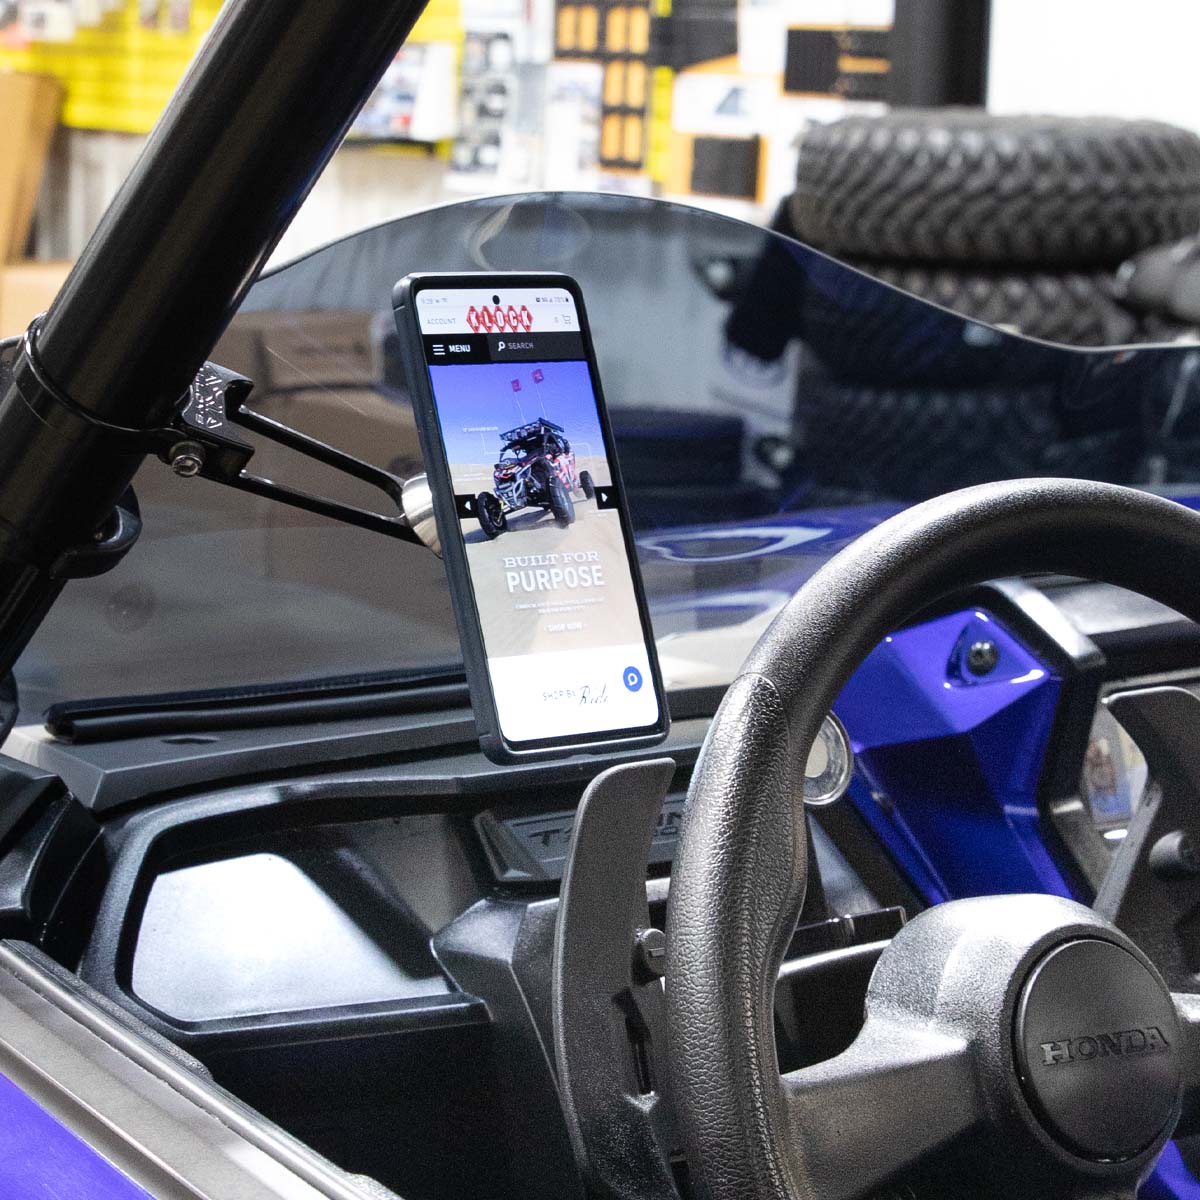 Offset Roll Cage Magnetic Phone Mount is a simple, secure and universal mounting system for your phone or device(It's a simple, secure and universal mounting system for your phone or device.)